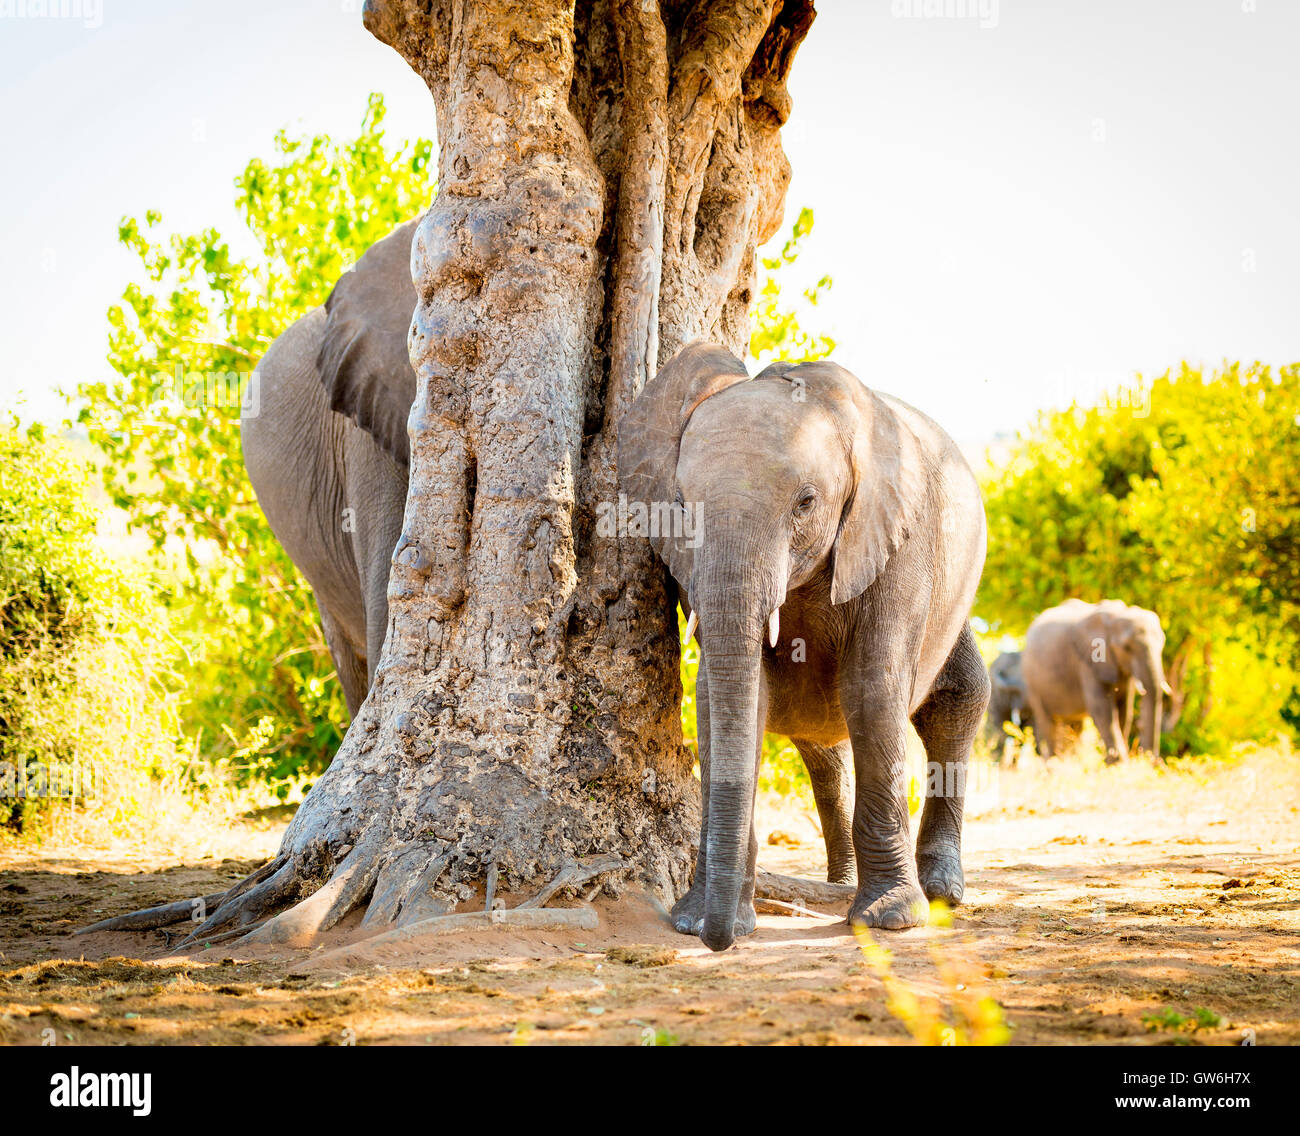 Young Elephant calf at the edge of herd in the wild in Botswana, Africa Stock Photo